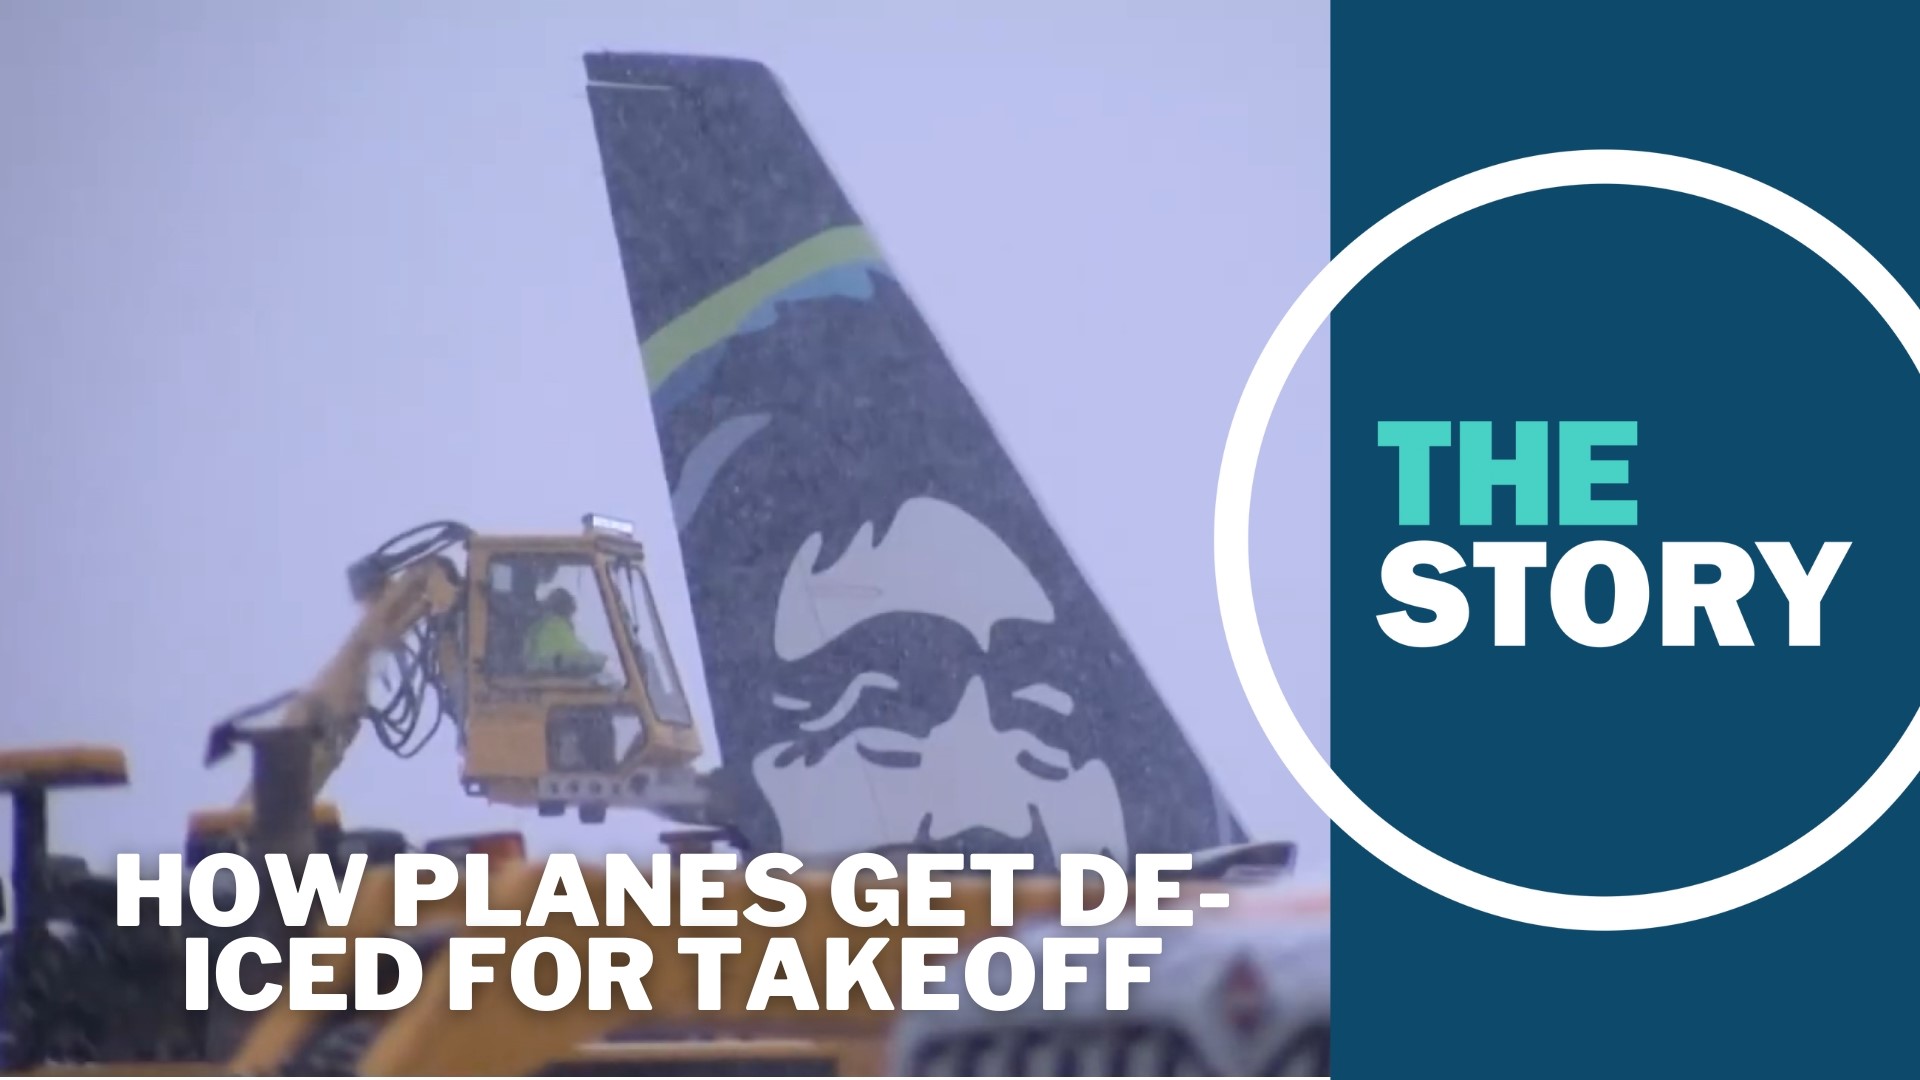 Ever wondered what’s happening when your plane gets de-iced? Here’s what the process looks like.